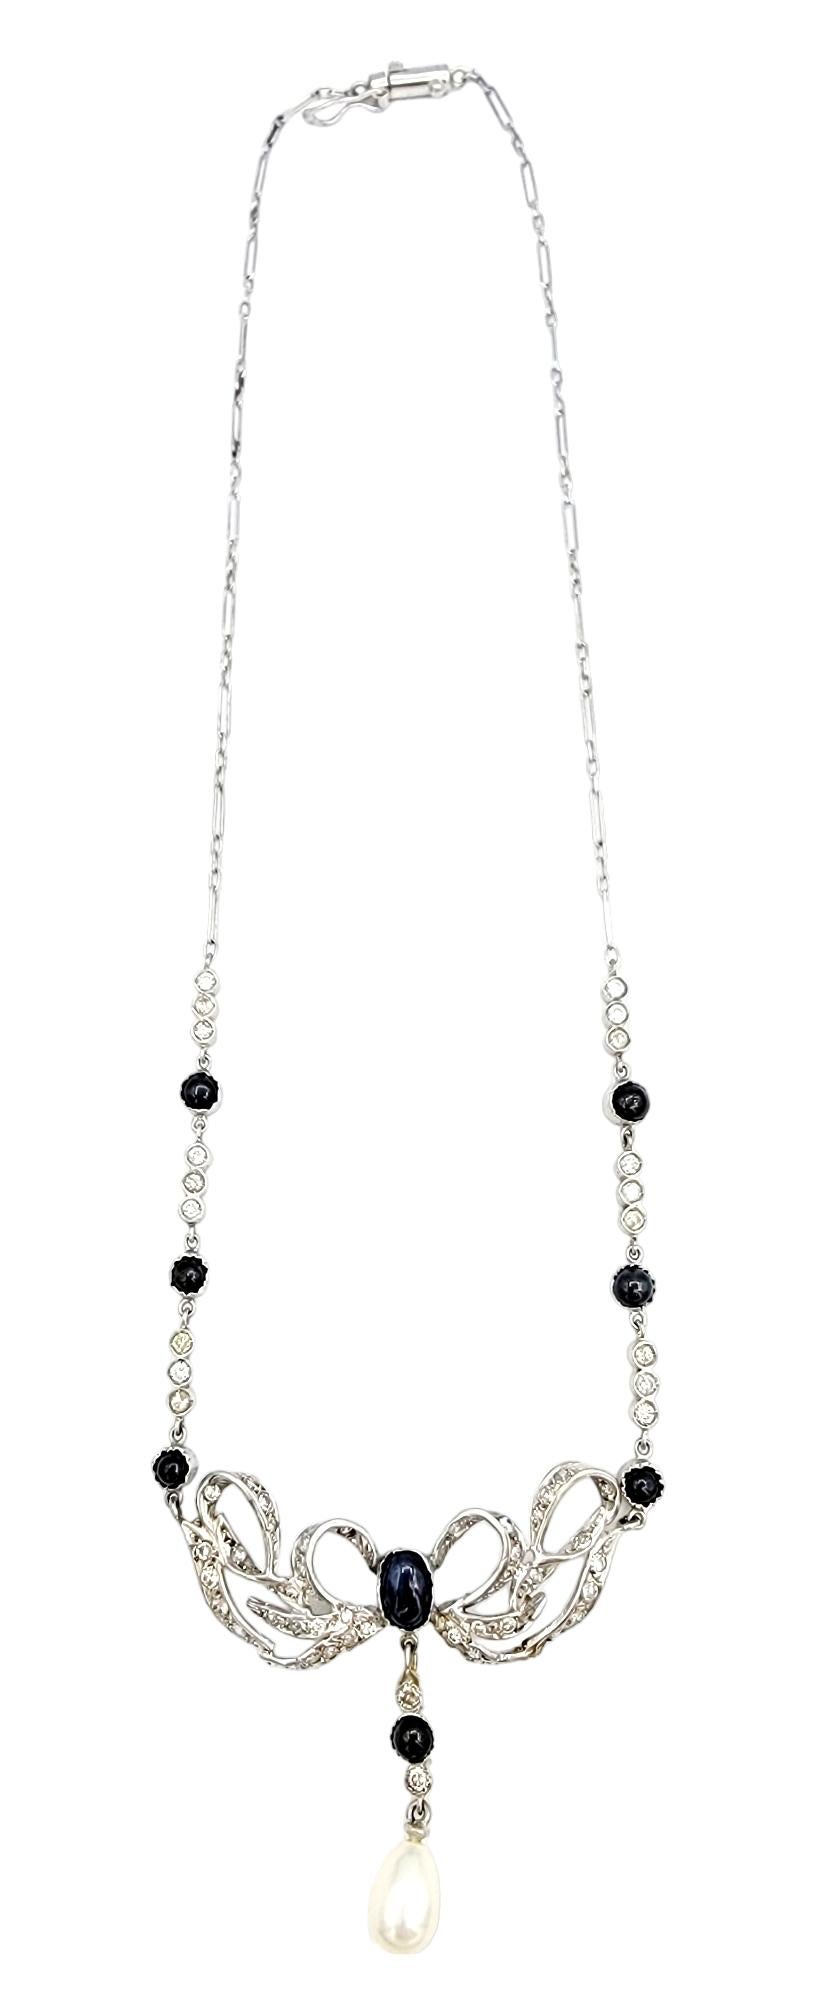 Cabochon Vintage Diamond, Sapphire and Cultured Pearl Drop Necklace Set in Platinum For Sale